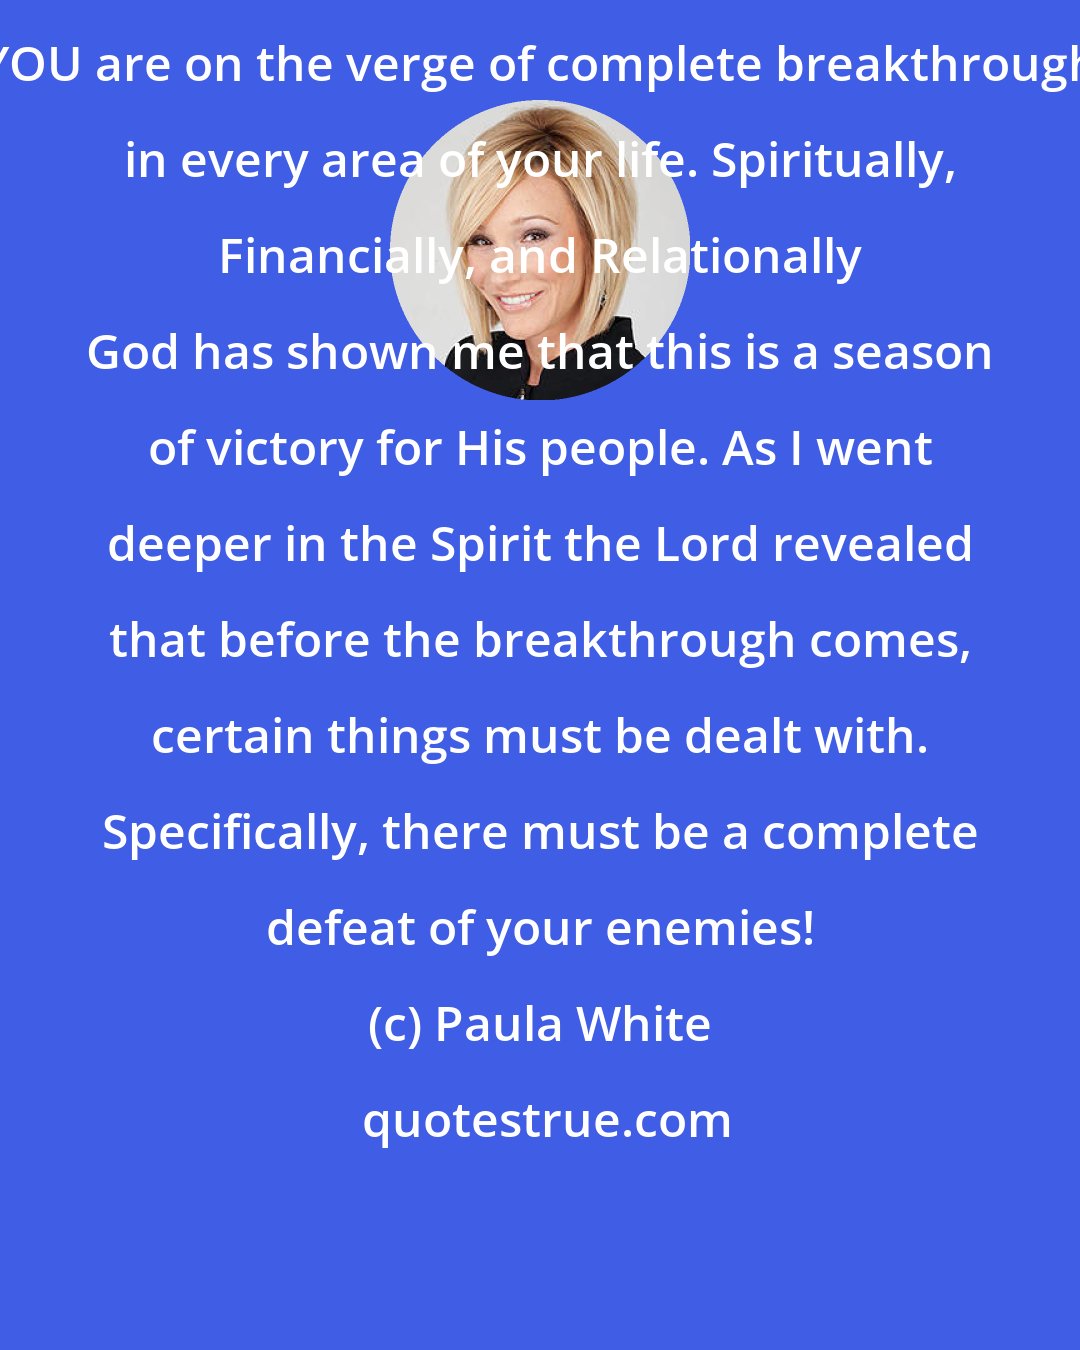 Paula White: YOU are on the verge of complete breakthrough in every area of your life. Spiritually, Financially, and Relationally God has shown me that this is a season of victory for His people. As I went deeper in the Spirit the Lord revealed that before the breakthrough comes, certain things must be dealt with. Specifically, there must be a complete defeat of your enemies!